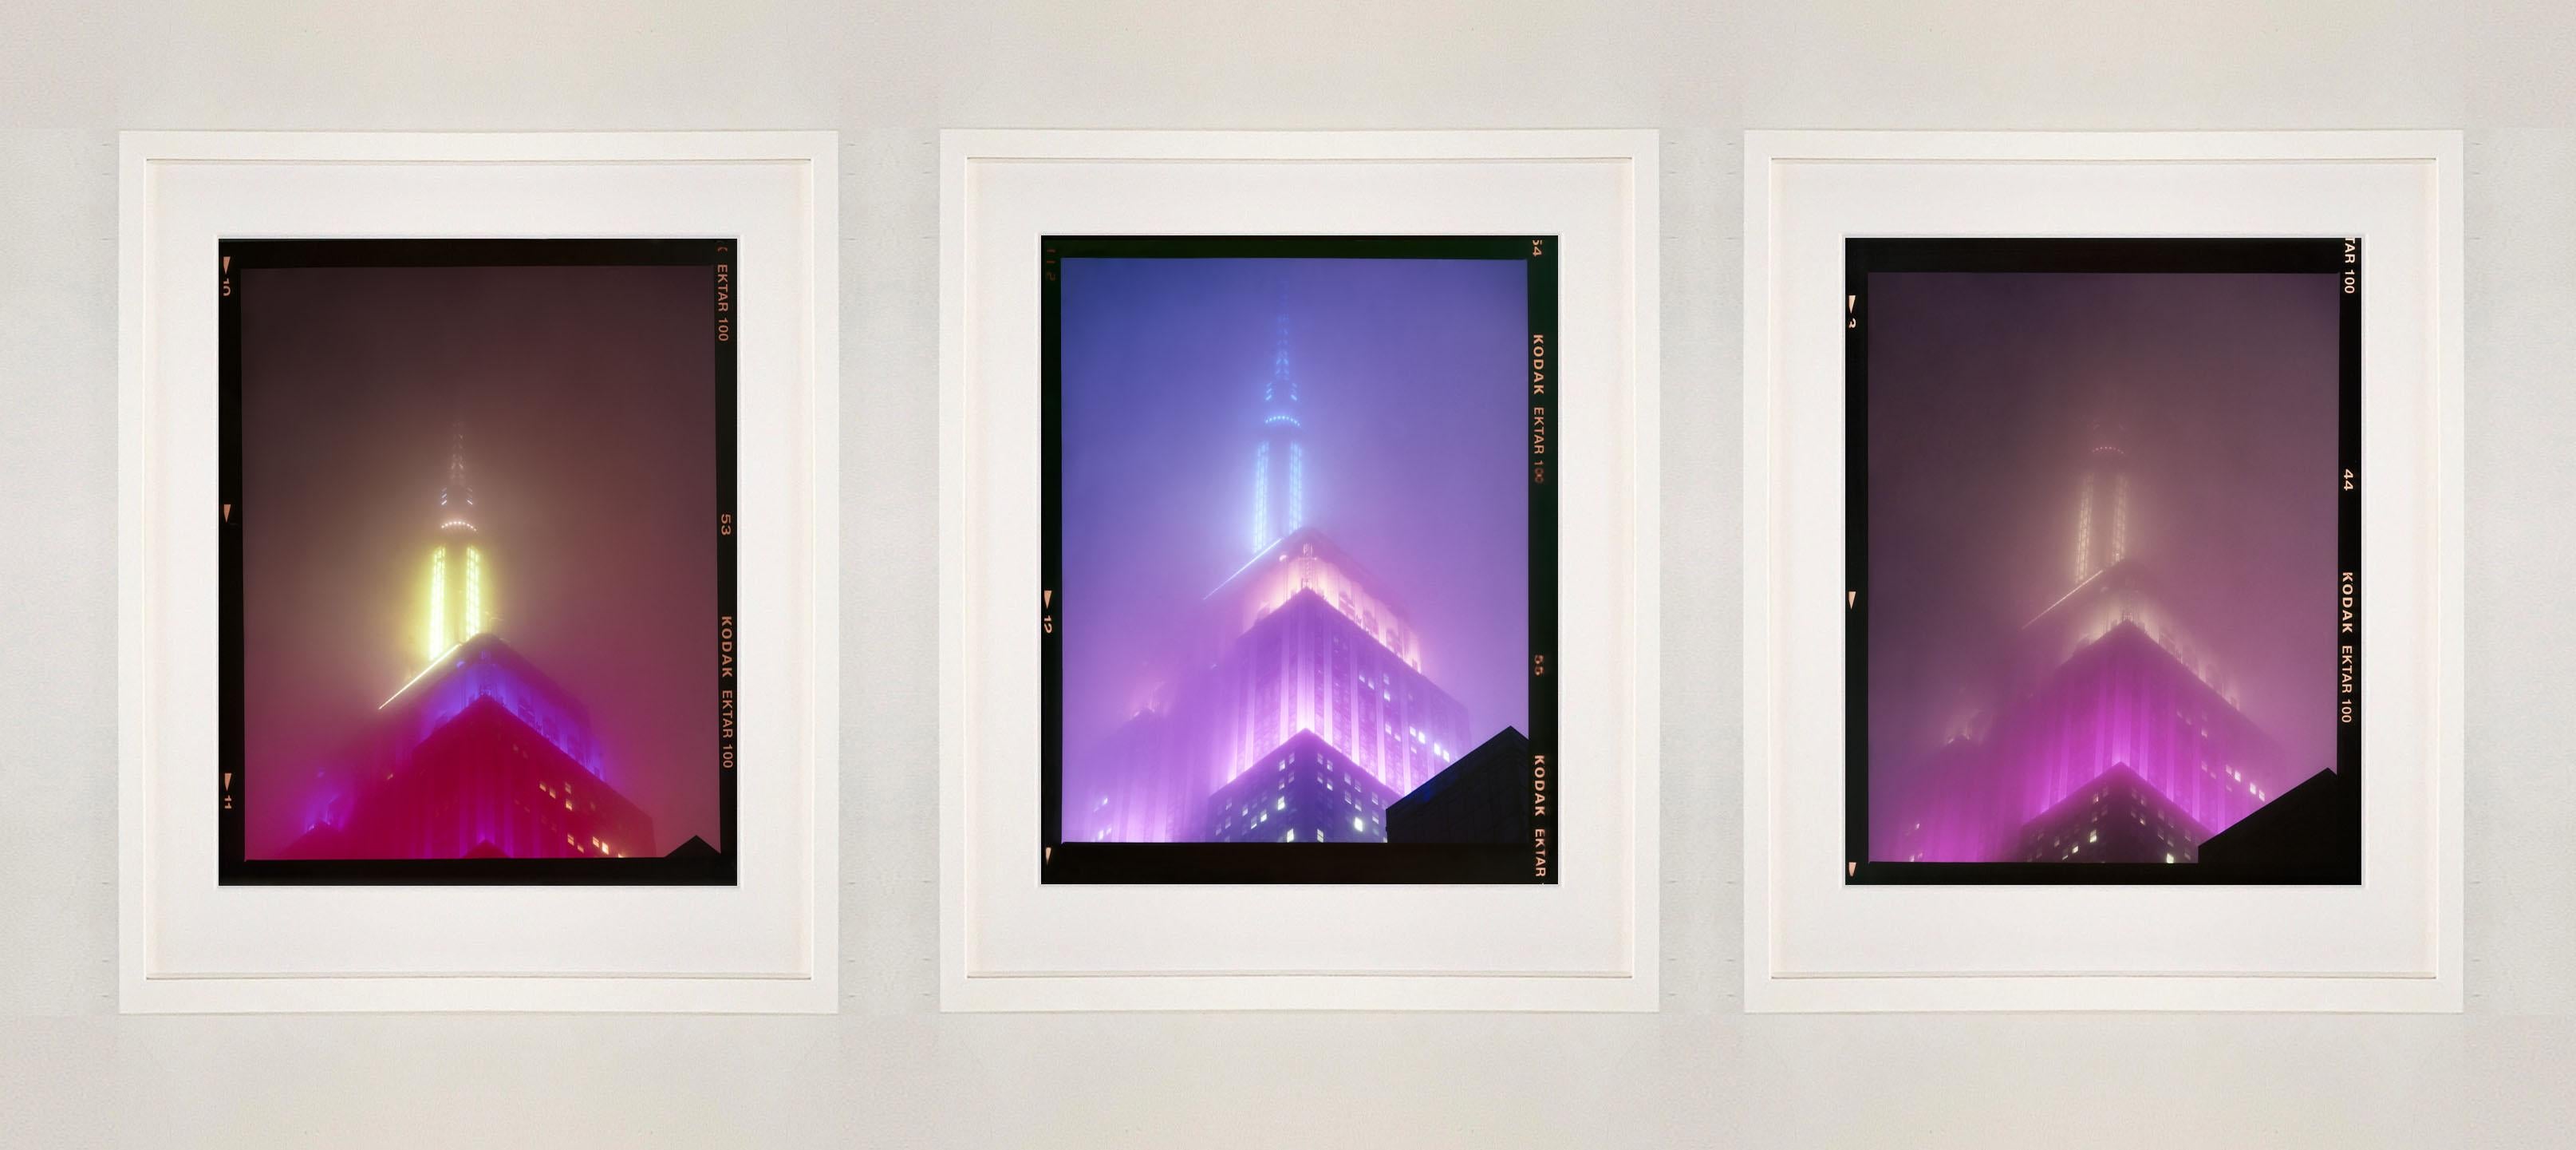 'NOMAD VII (Film Rebate)', New York. Richard Heeps has photographed the iconic Empire State building in the mist. The NOMAD sequence of photographs capture the art deco architecture illuminated by changing colours, and is part of Richard's street